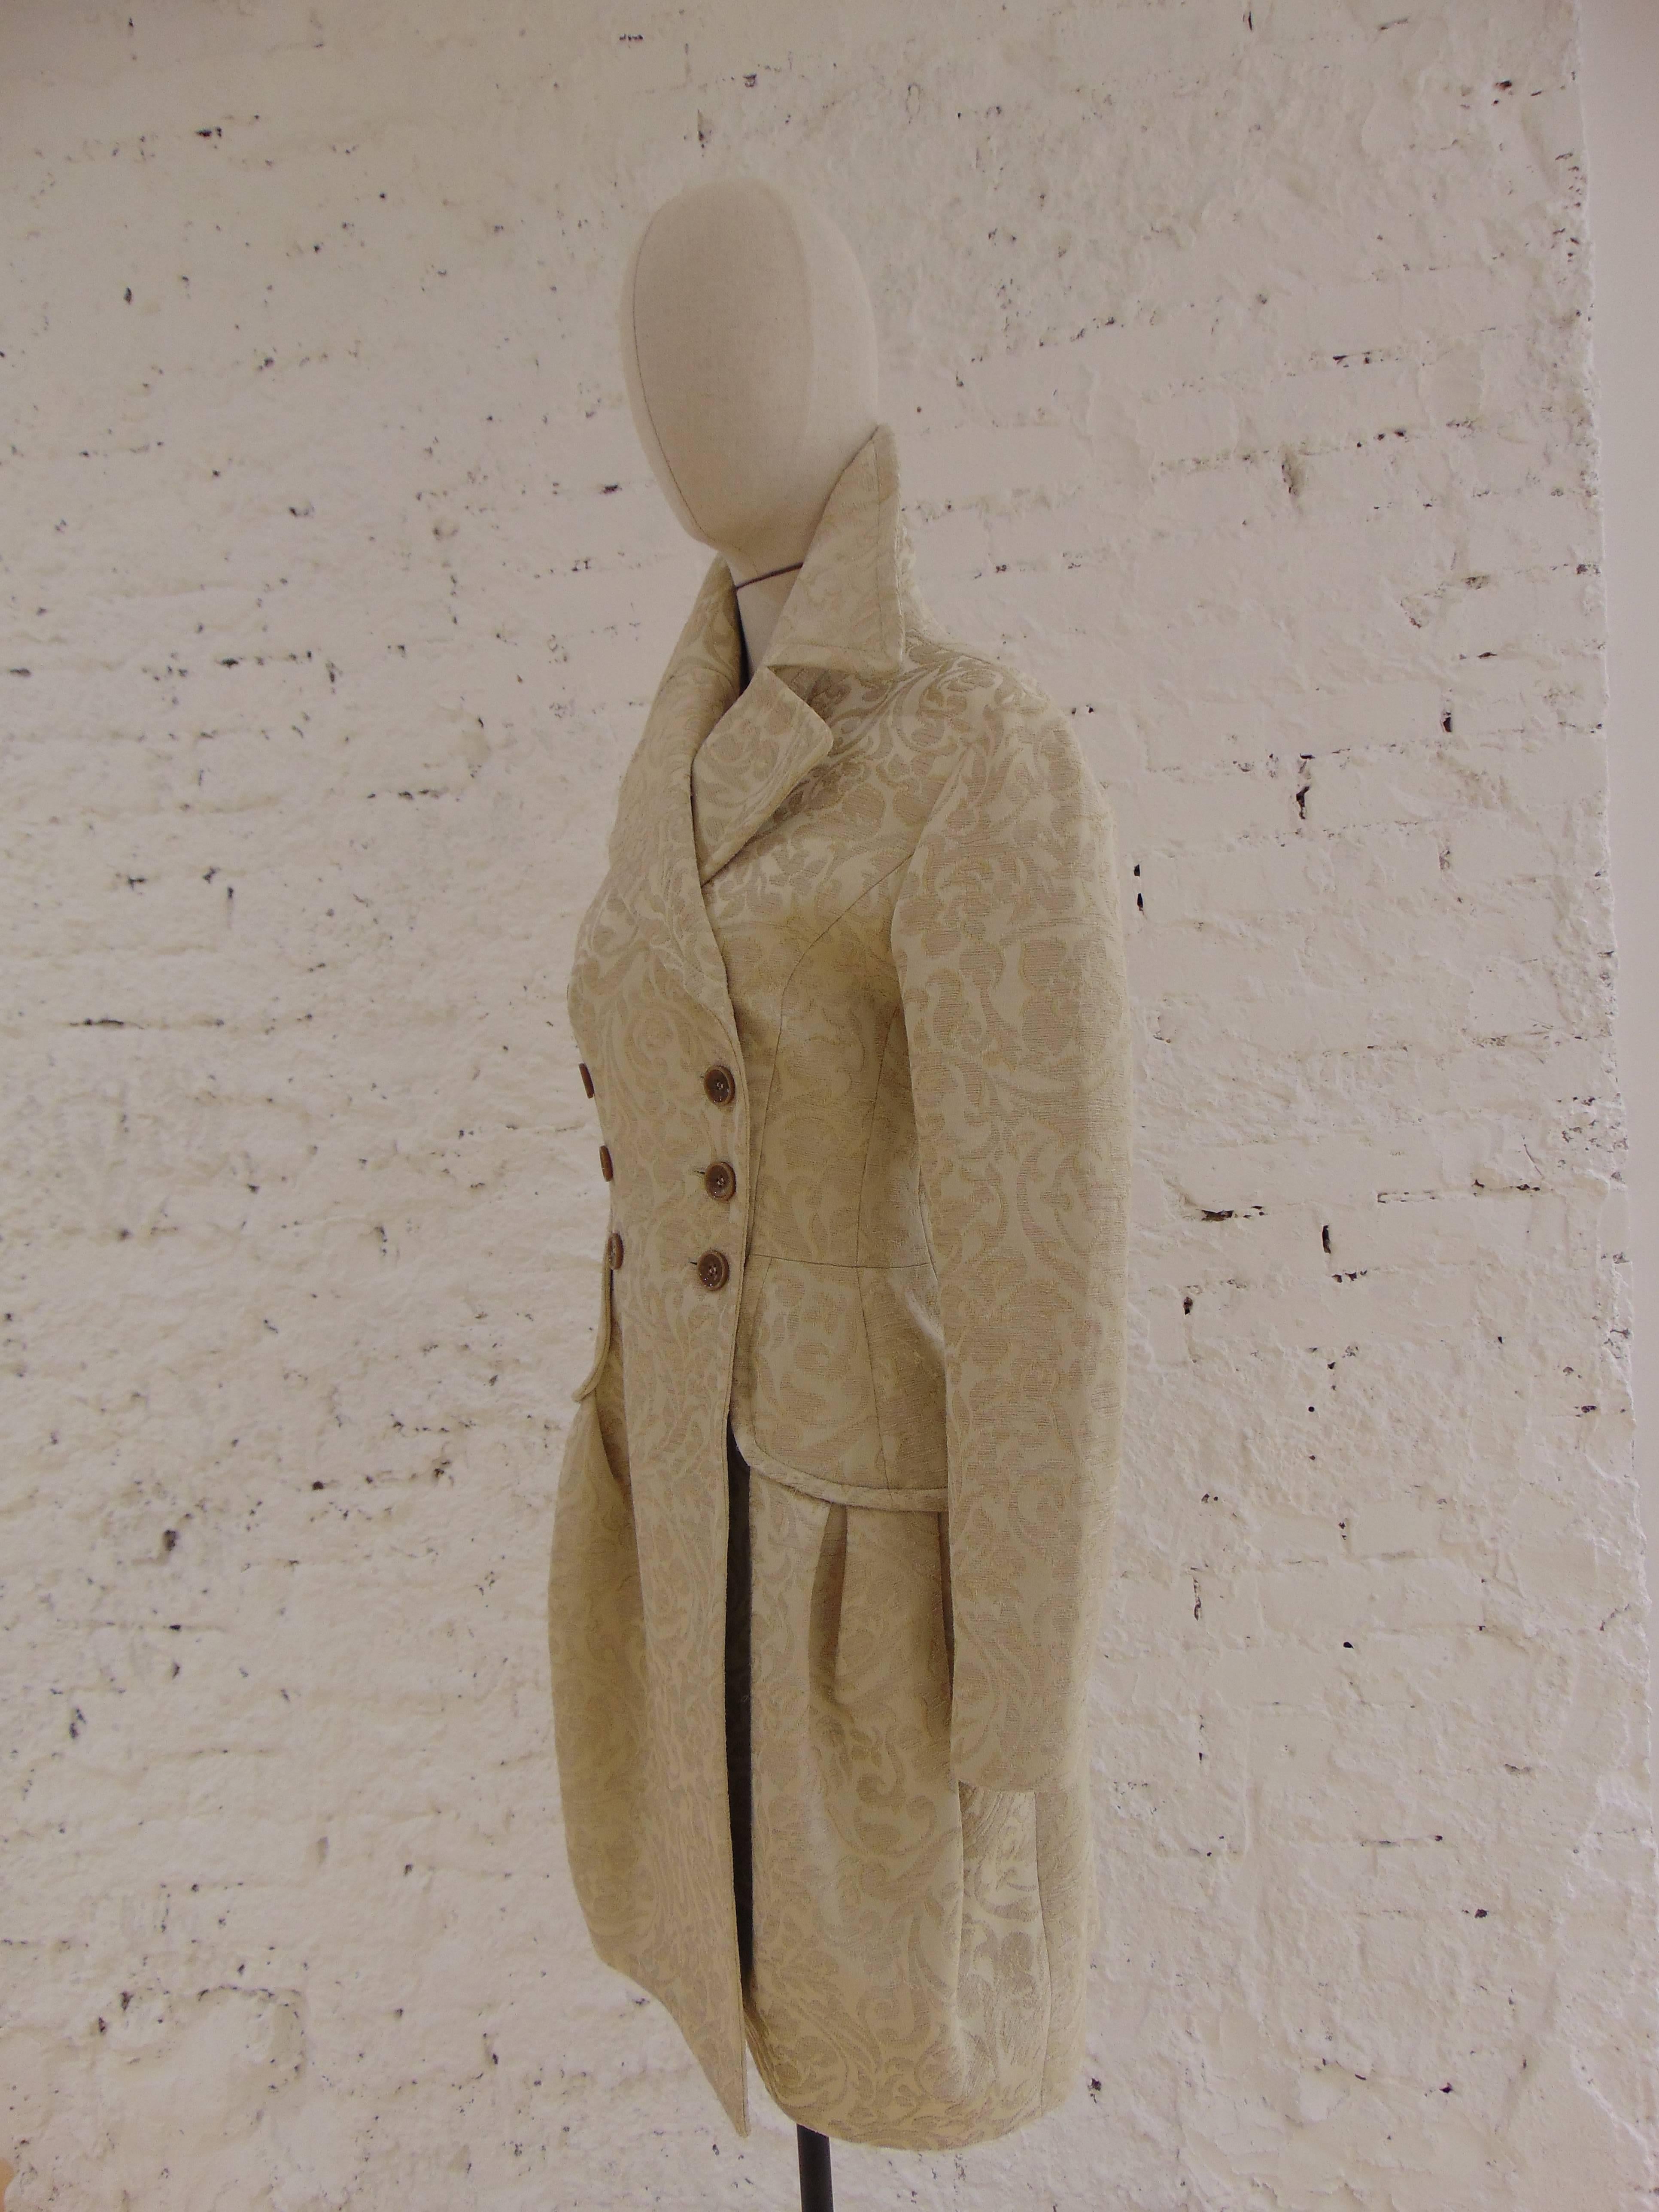 John Galliano cream damasque coat
totally made in italy in size 42
composition: Nylon and other